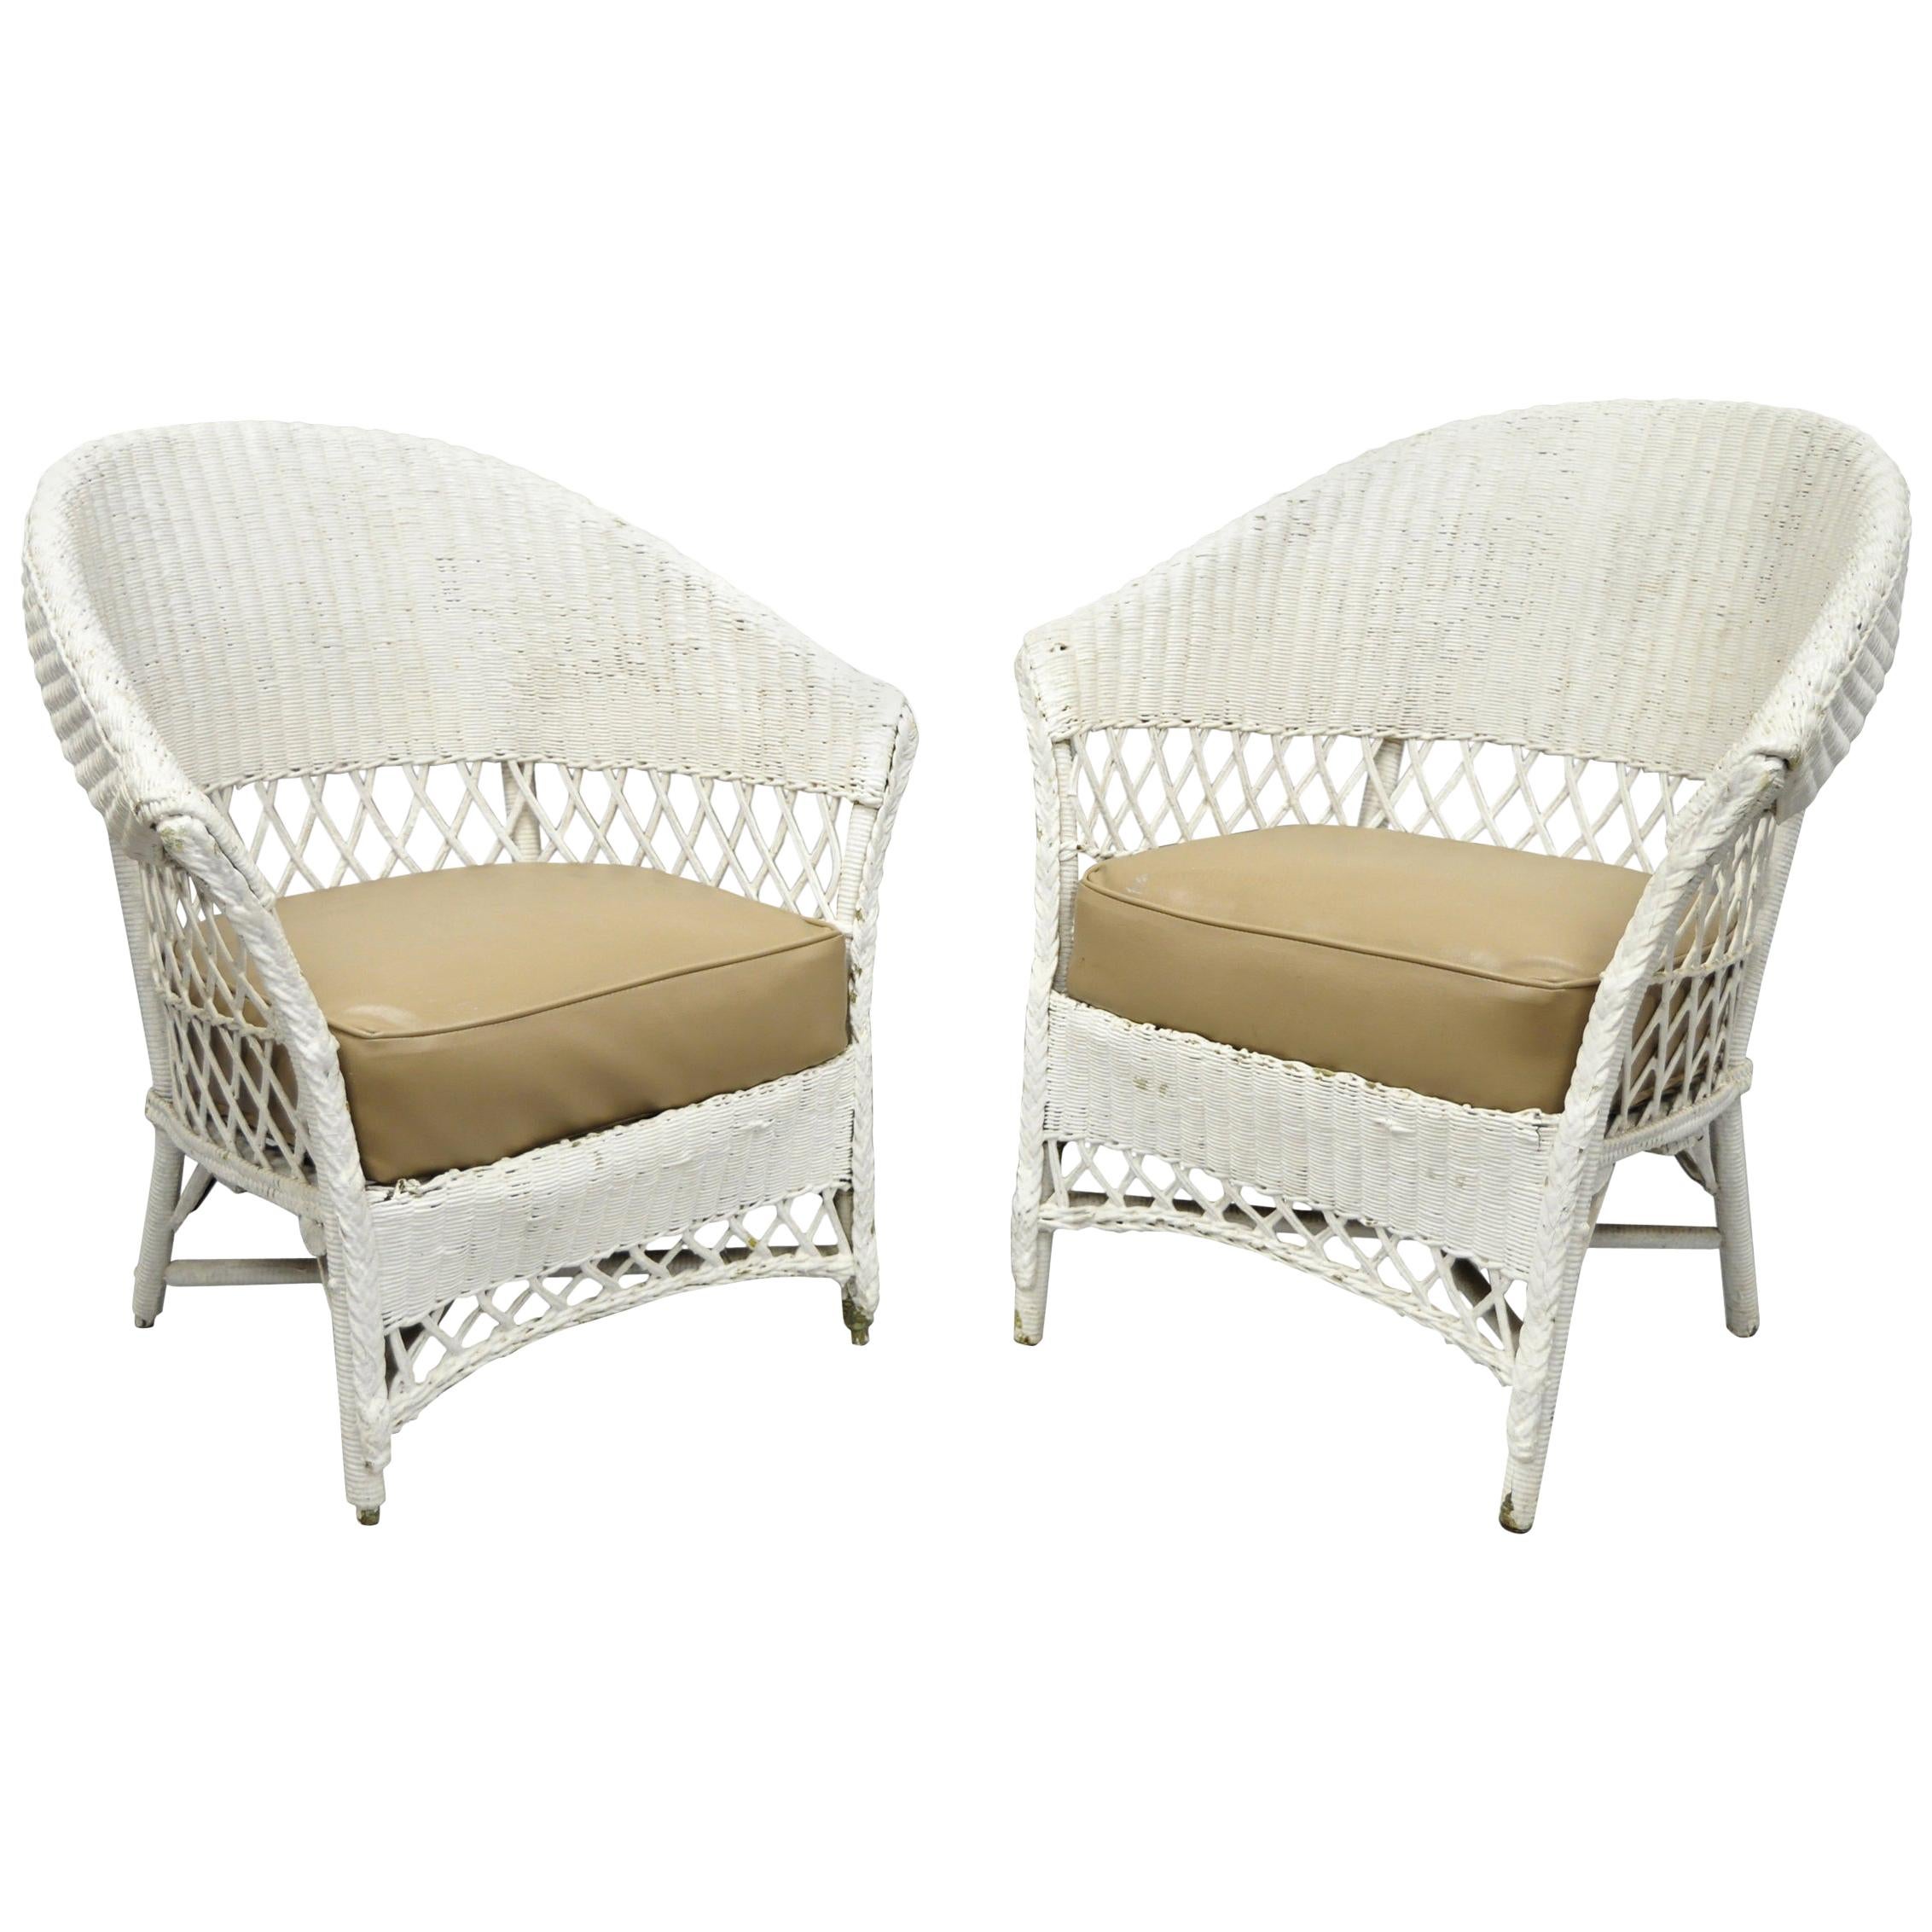 Antique Pair of White Wicker Rattan His and Hers Sunroom Victorian Armchairs